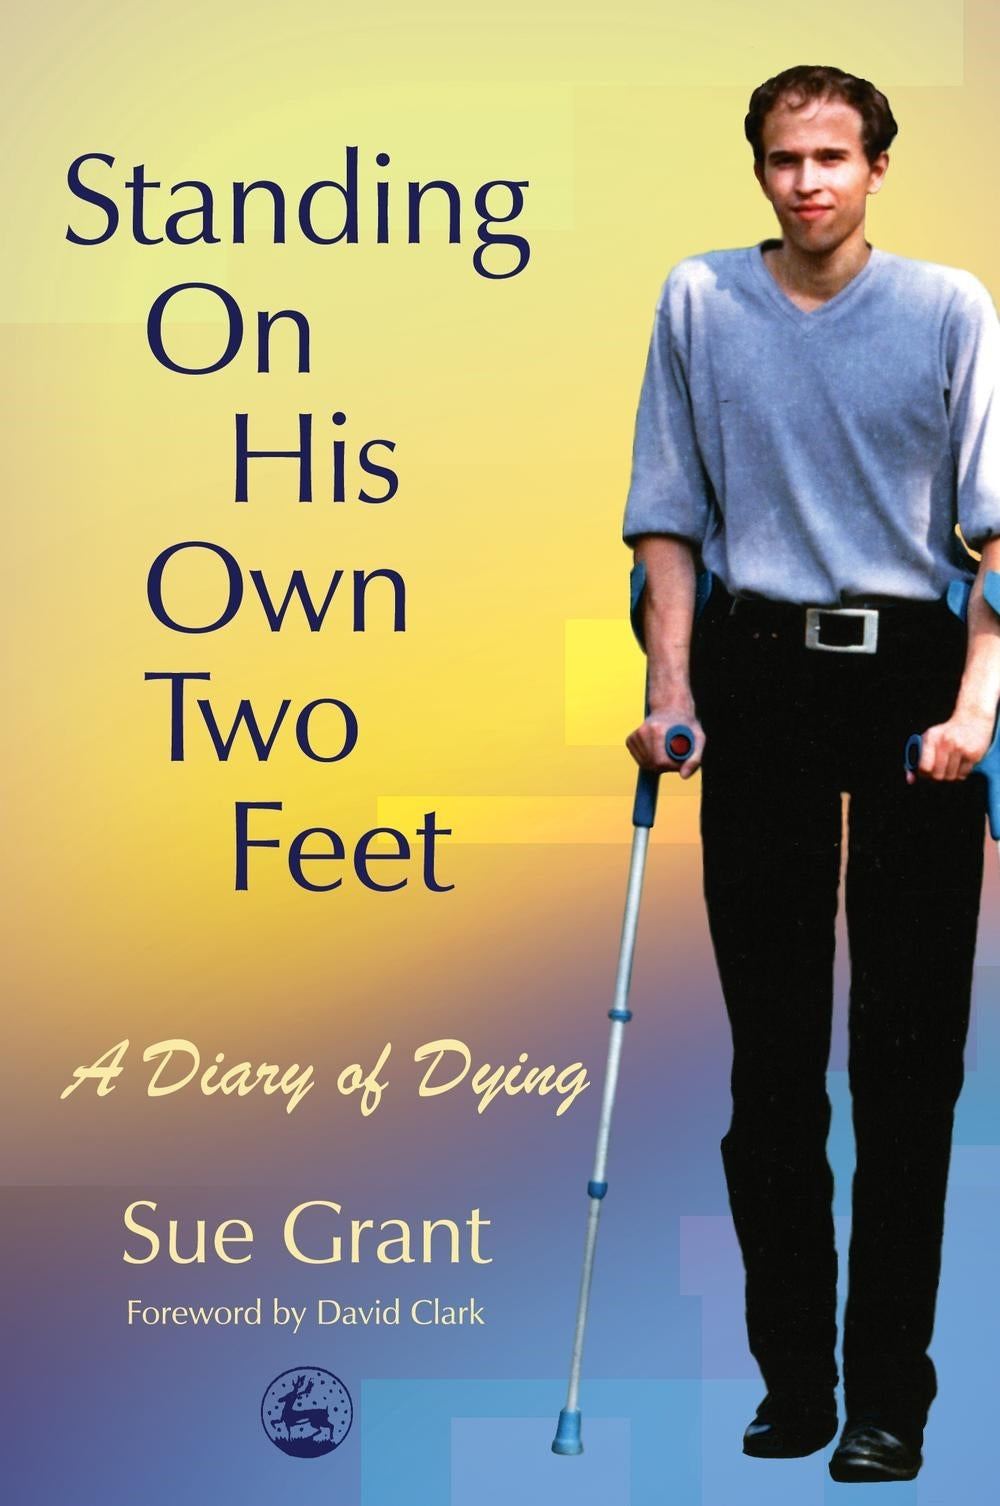 Standing On His Own Two Feet by Sue Grant